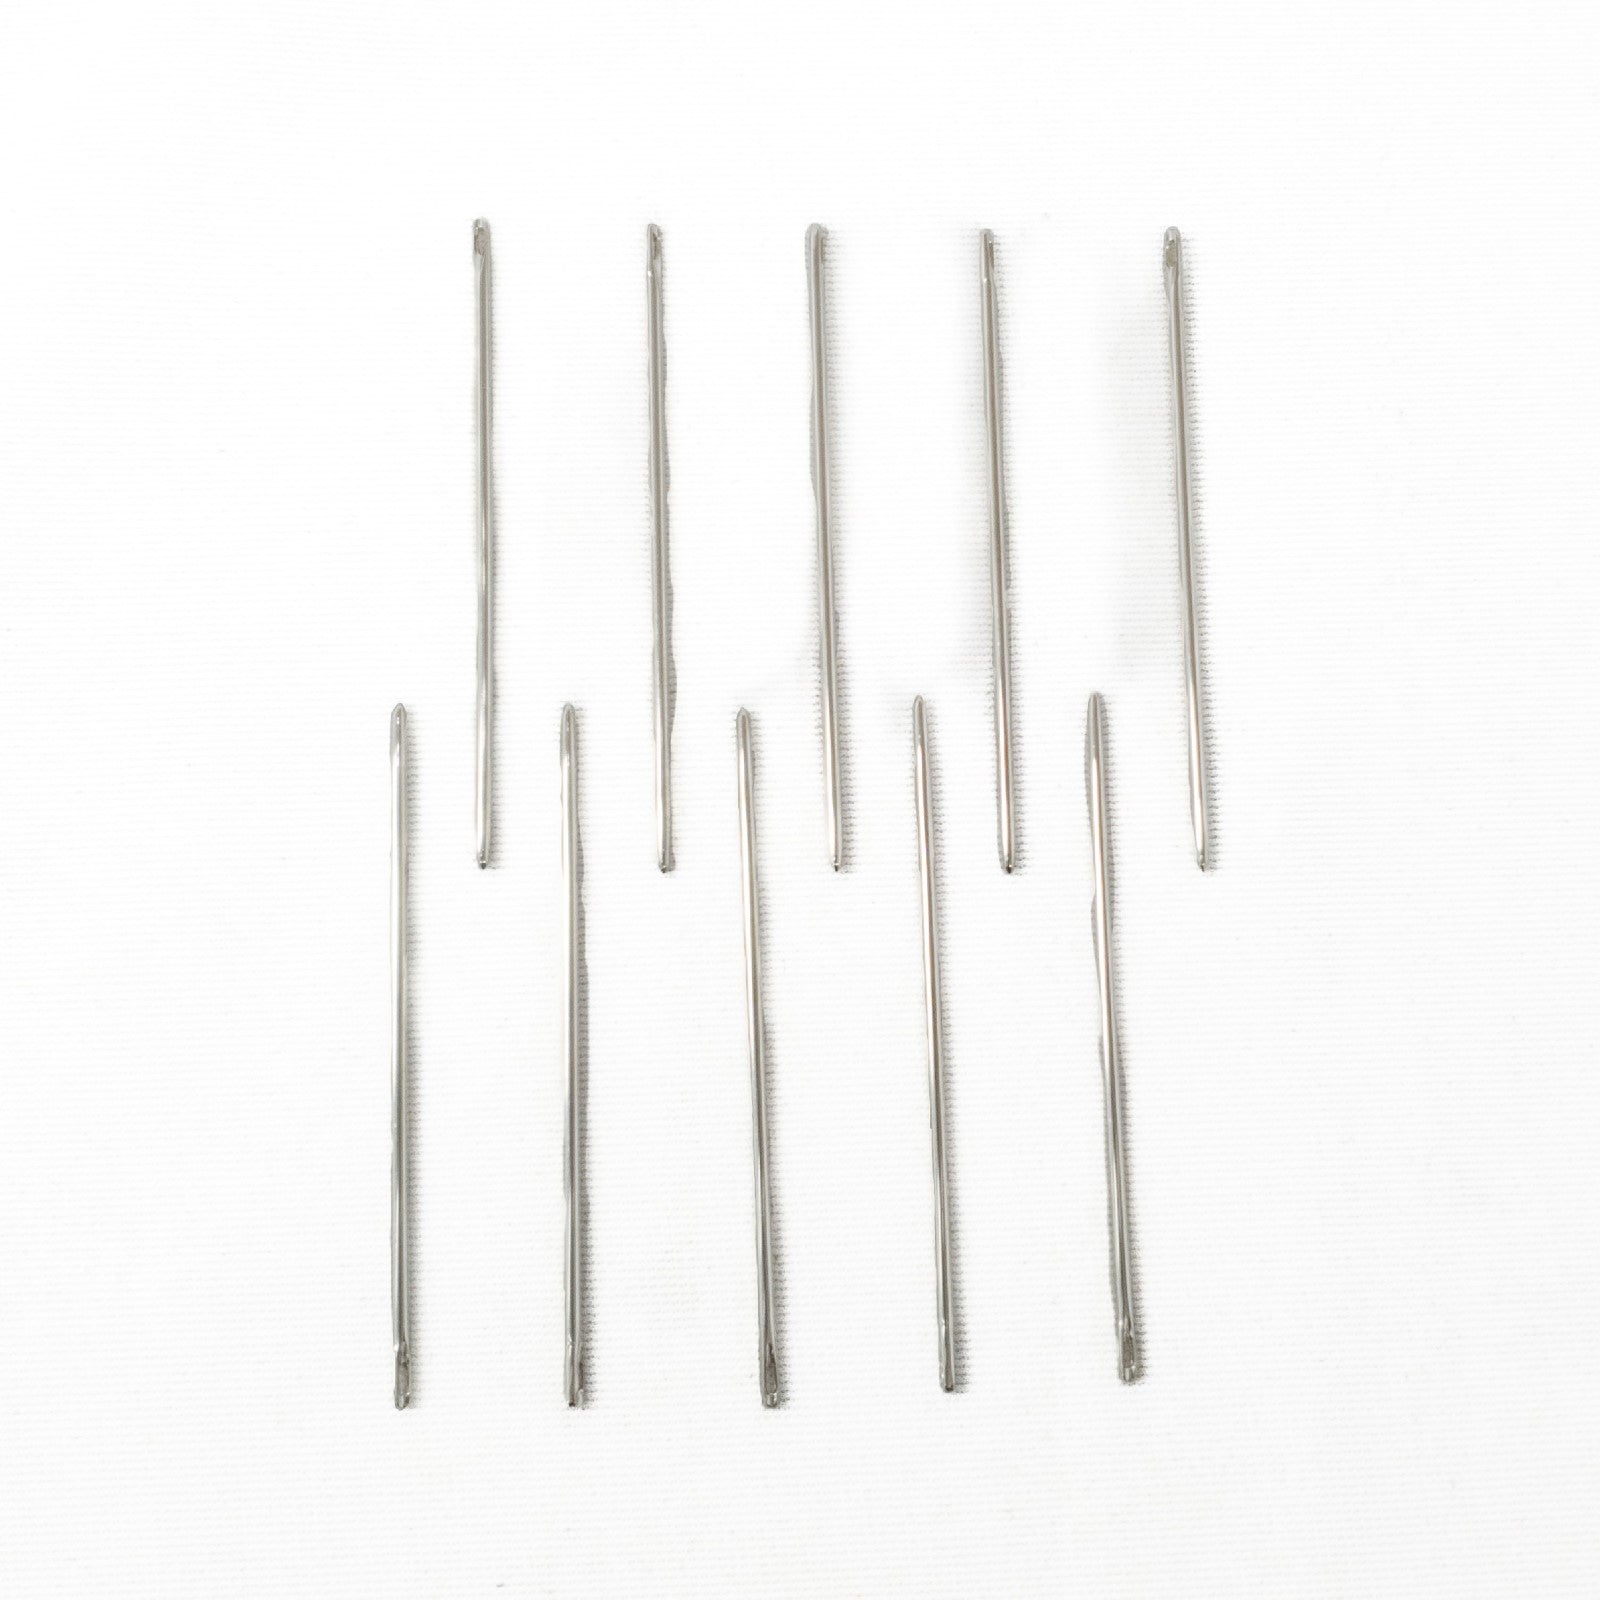 Harness Stitching Needles, 10 | The Leather Guy